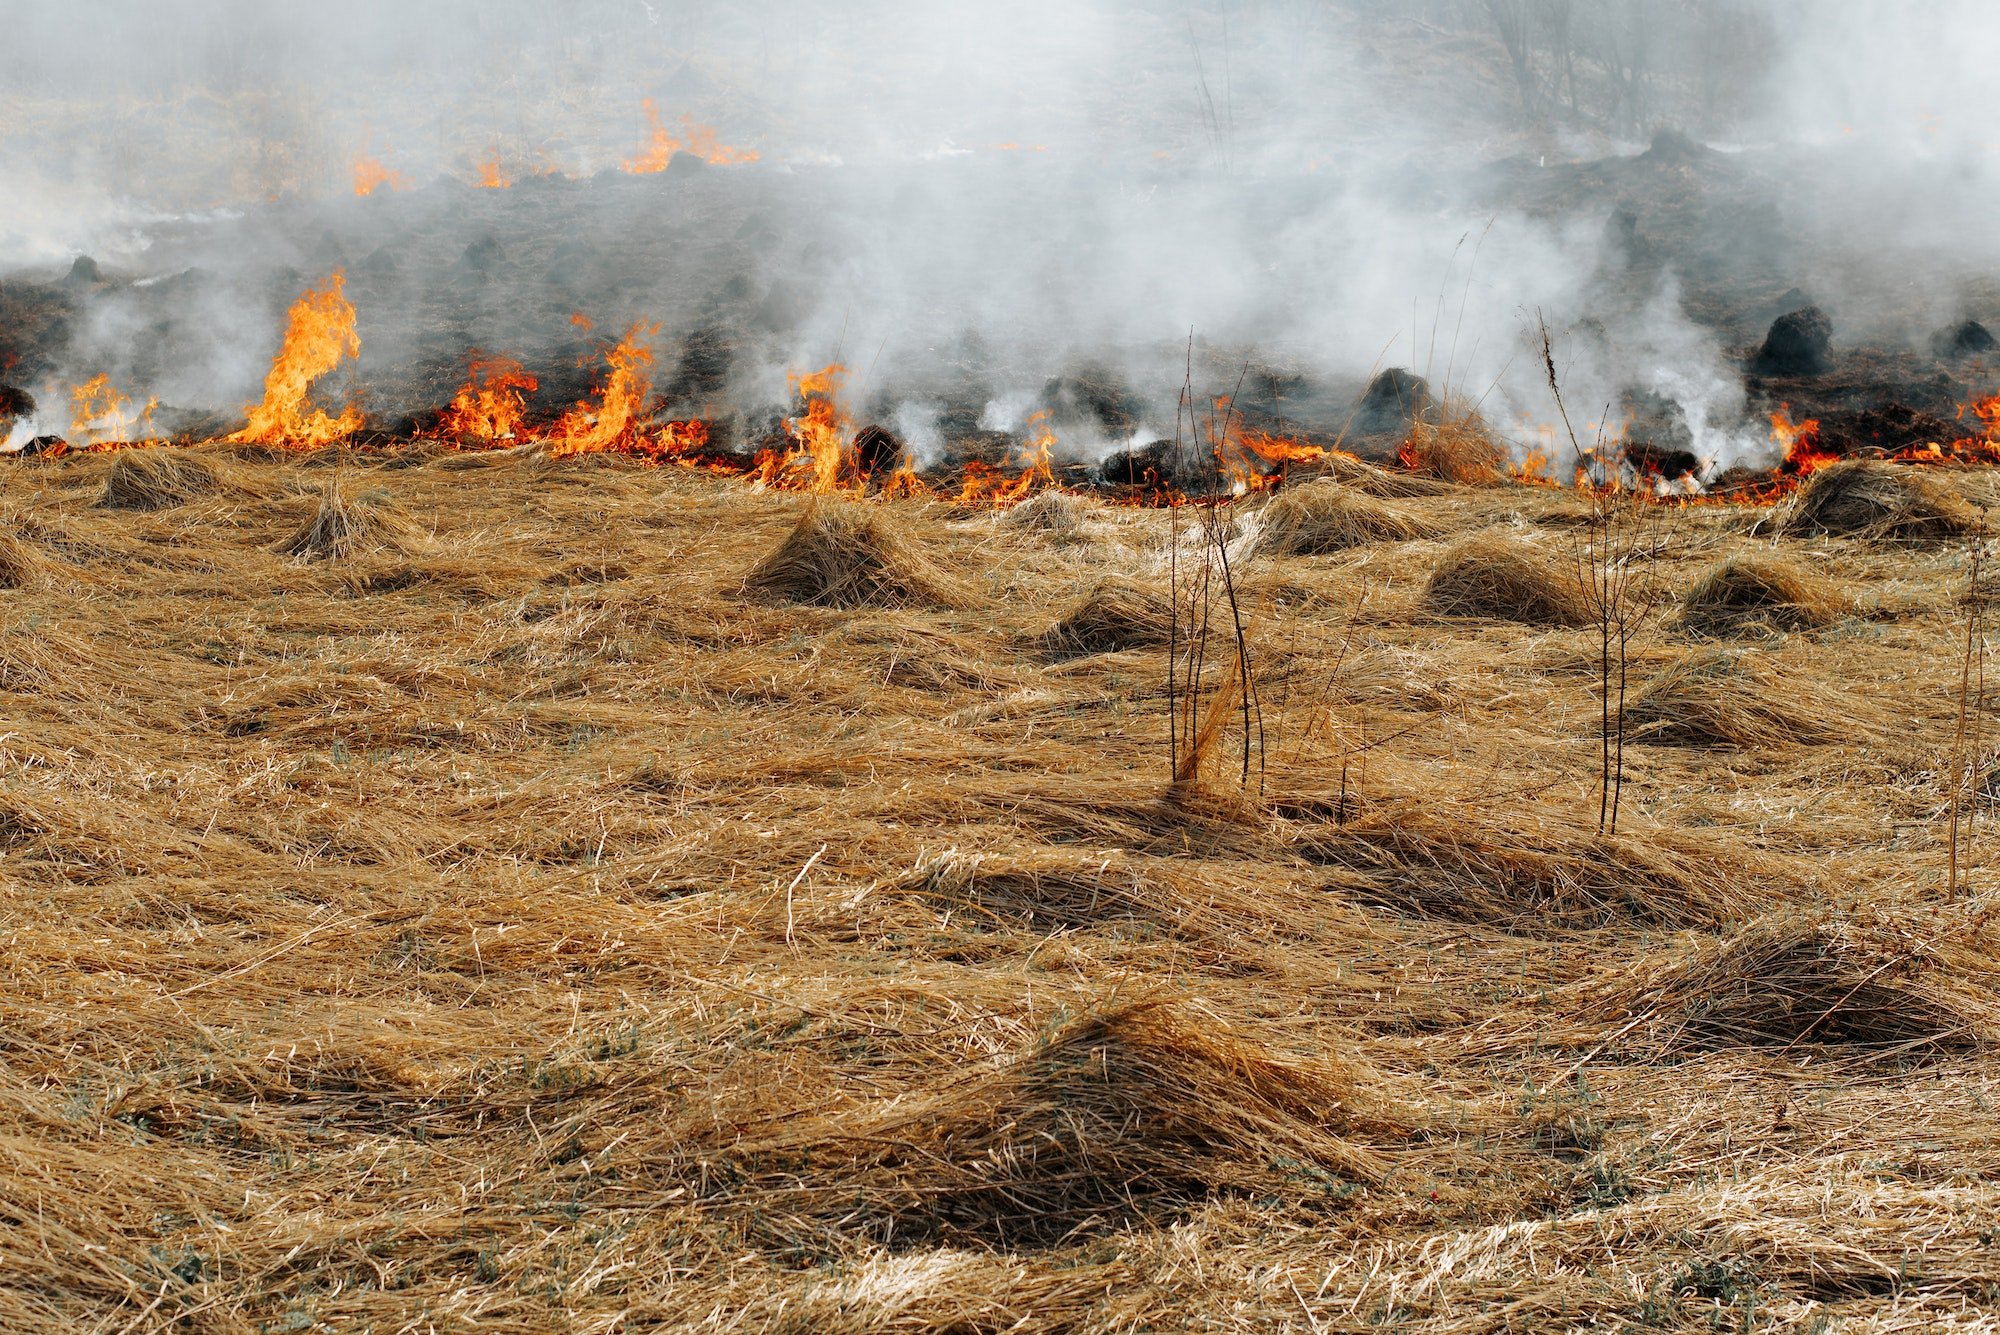 Field fire, natural disaster, environmental problem. Bright colorful flames on dry grass